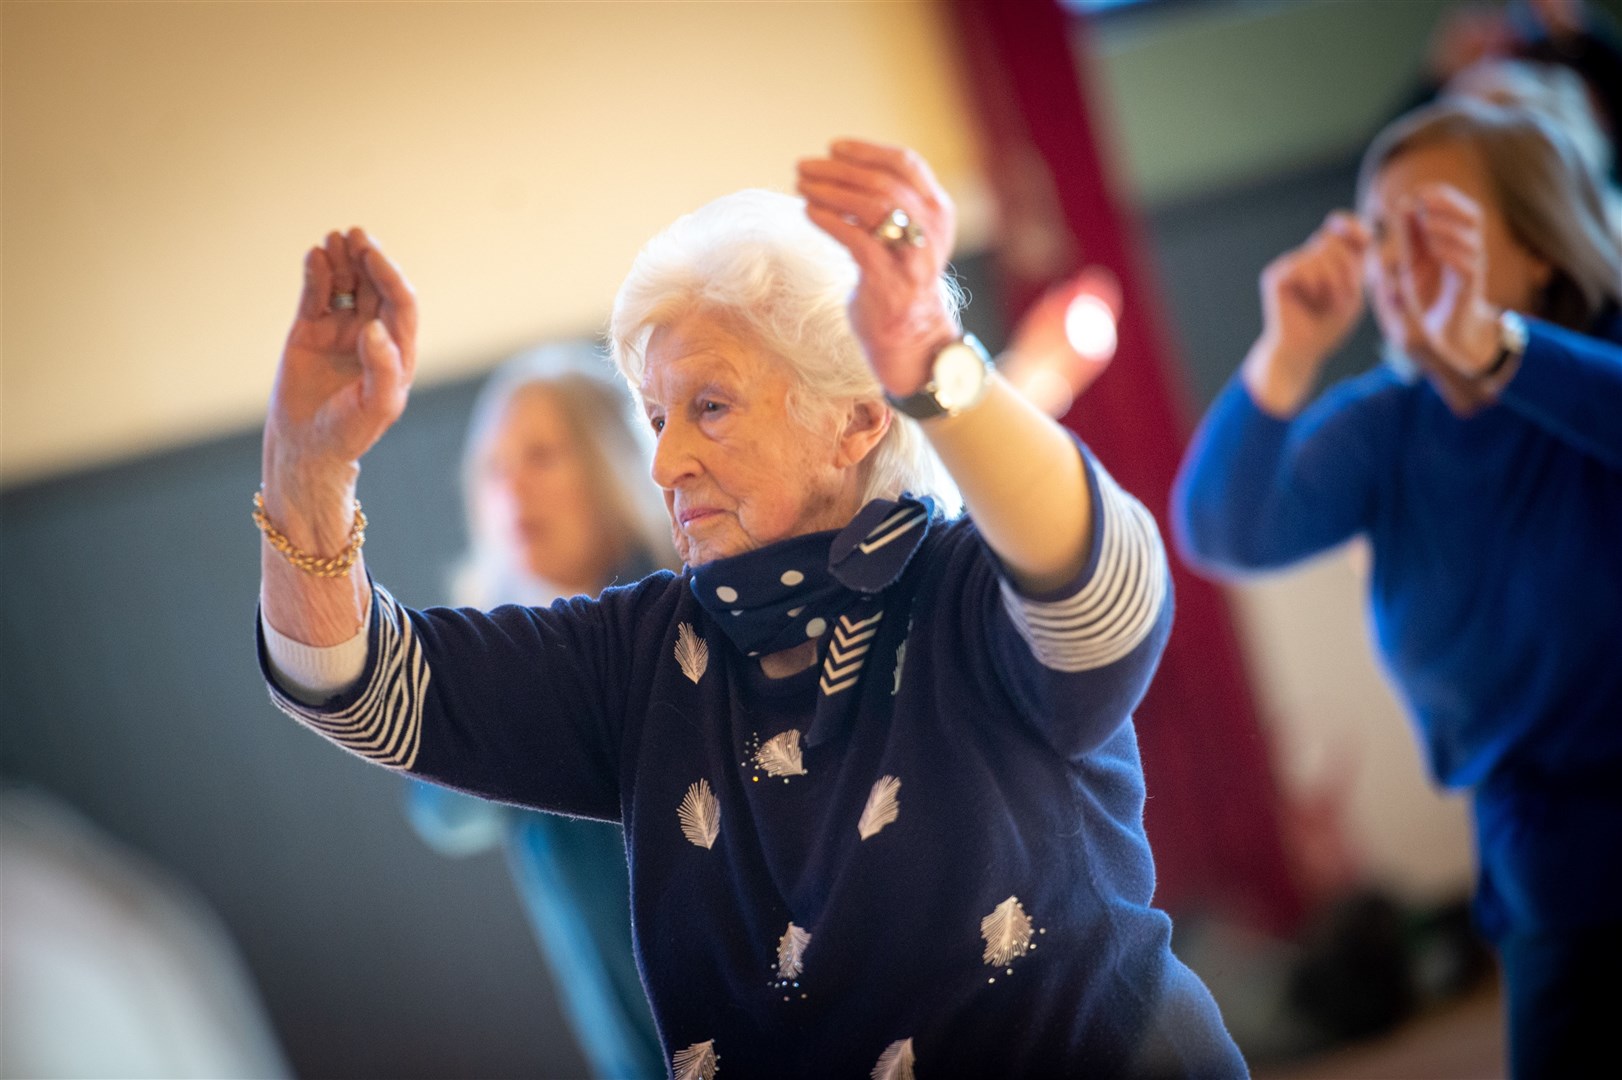 Vera Nairn (95) keeps up the pace at the hour-long fitness class. Picture: Callum Mackay.